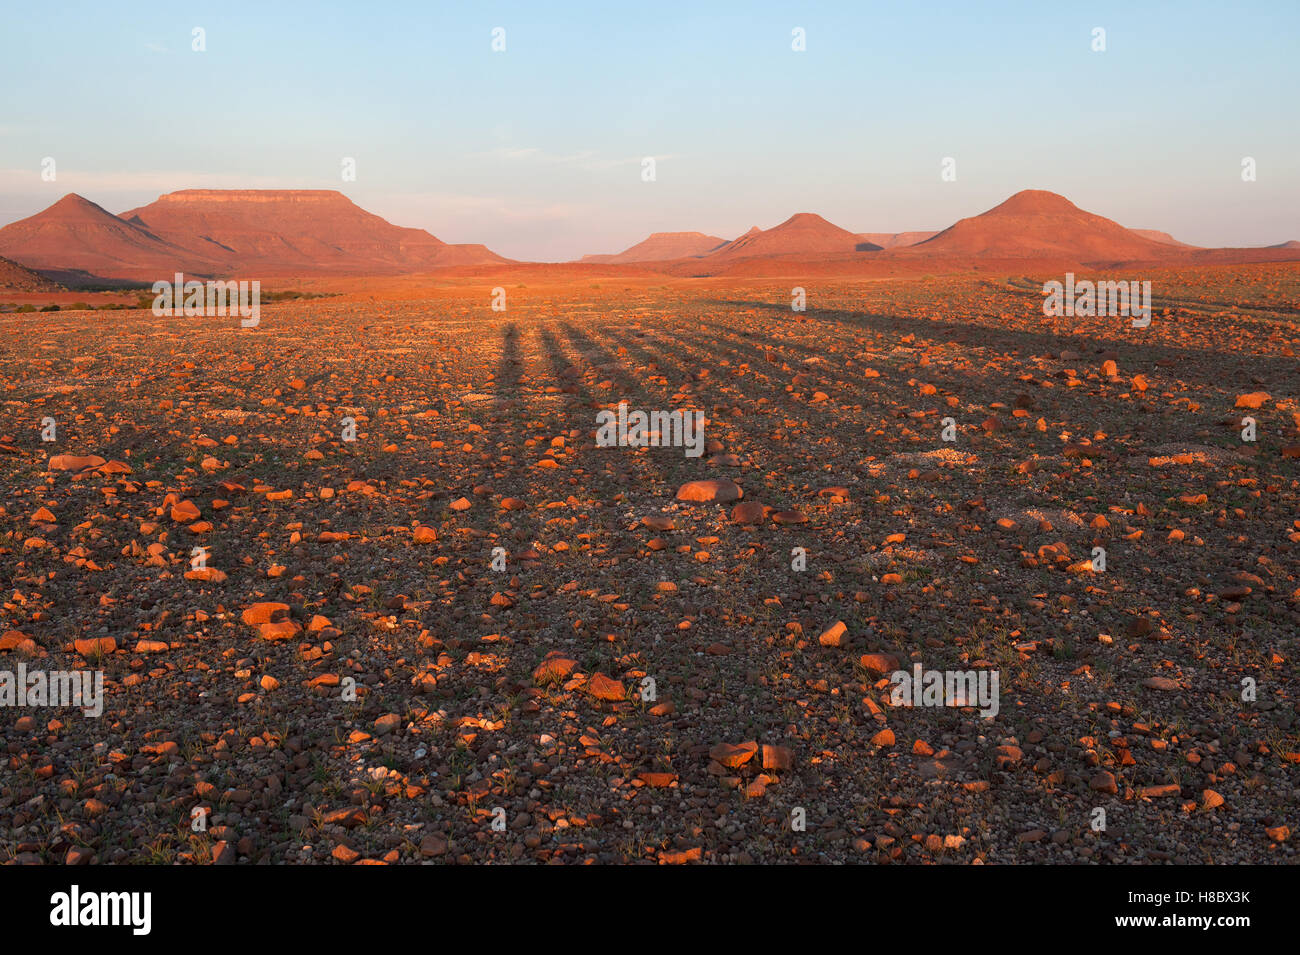 Scenic view of Damaraland landscape and shadows Stock Photo